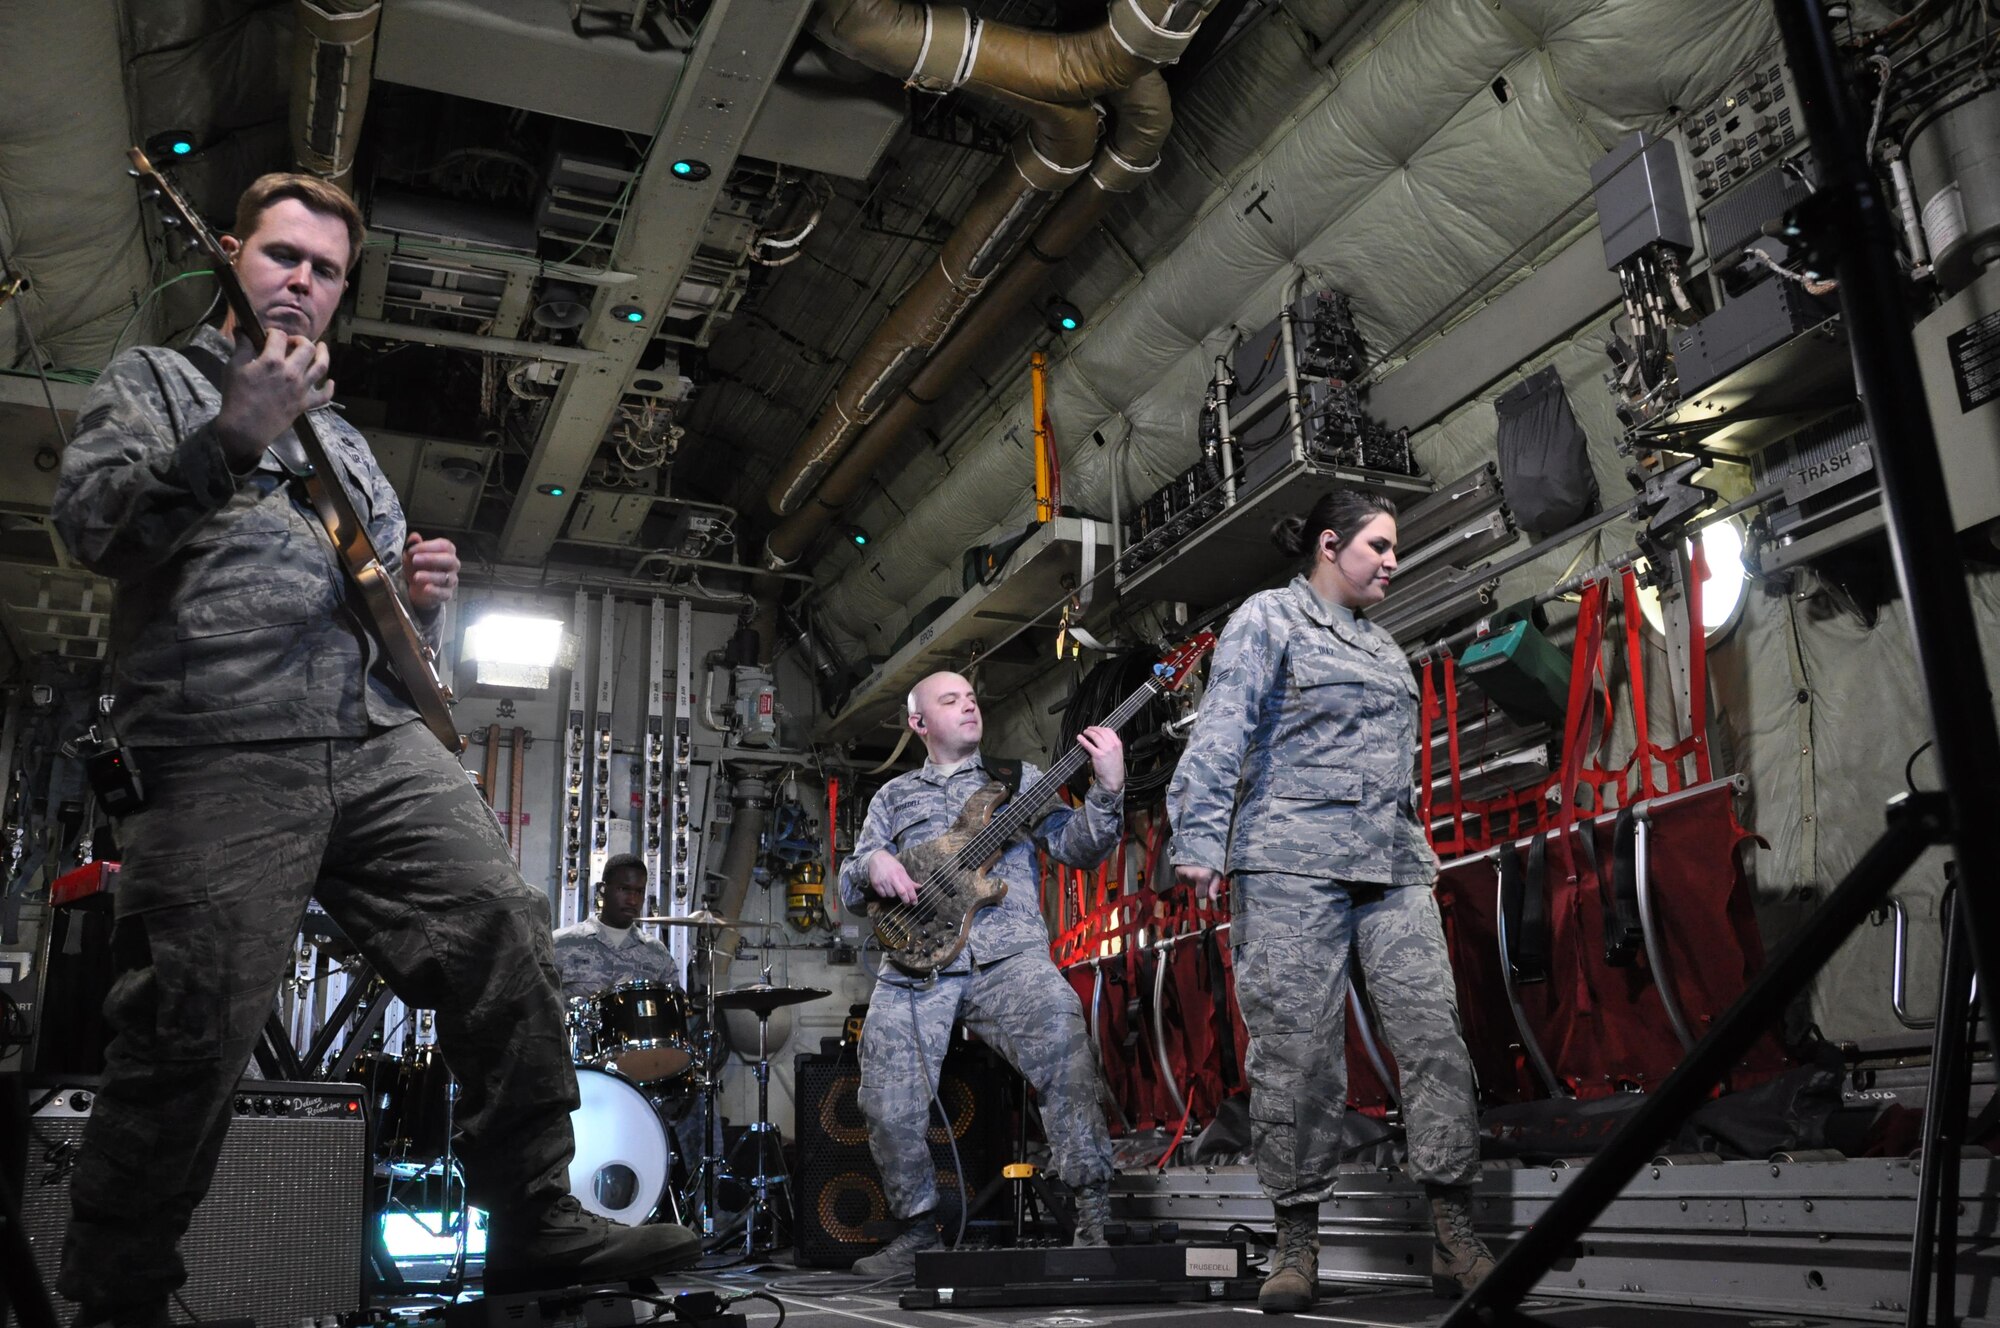 Members of the United States Air Force Academy Band’s, “Blue Steel,” perform inside an Air Force Reserve Command C-130 Hercules aircraft assigned to the 302nd Airlift Wing while recording scenes for their newest music video featuring the song “Fly Higher,” May 1, at Peterson Air Force Base, Colo.